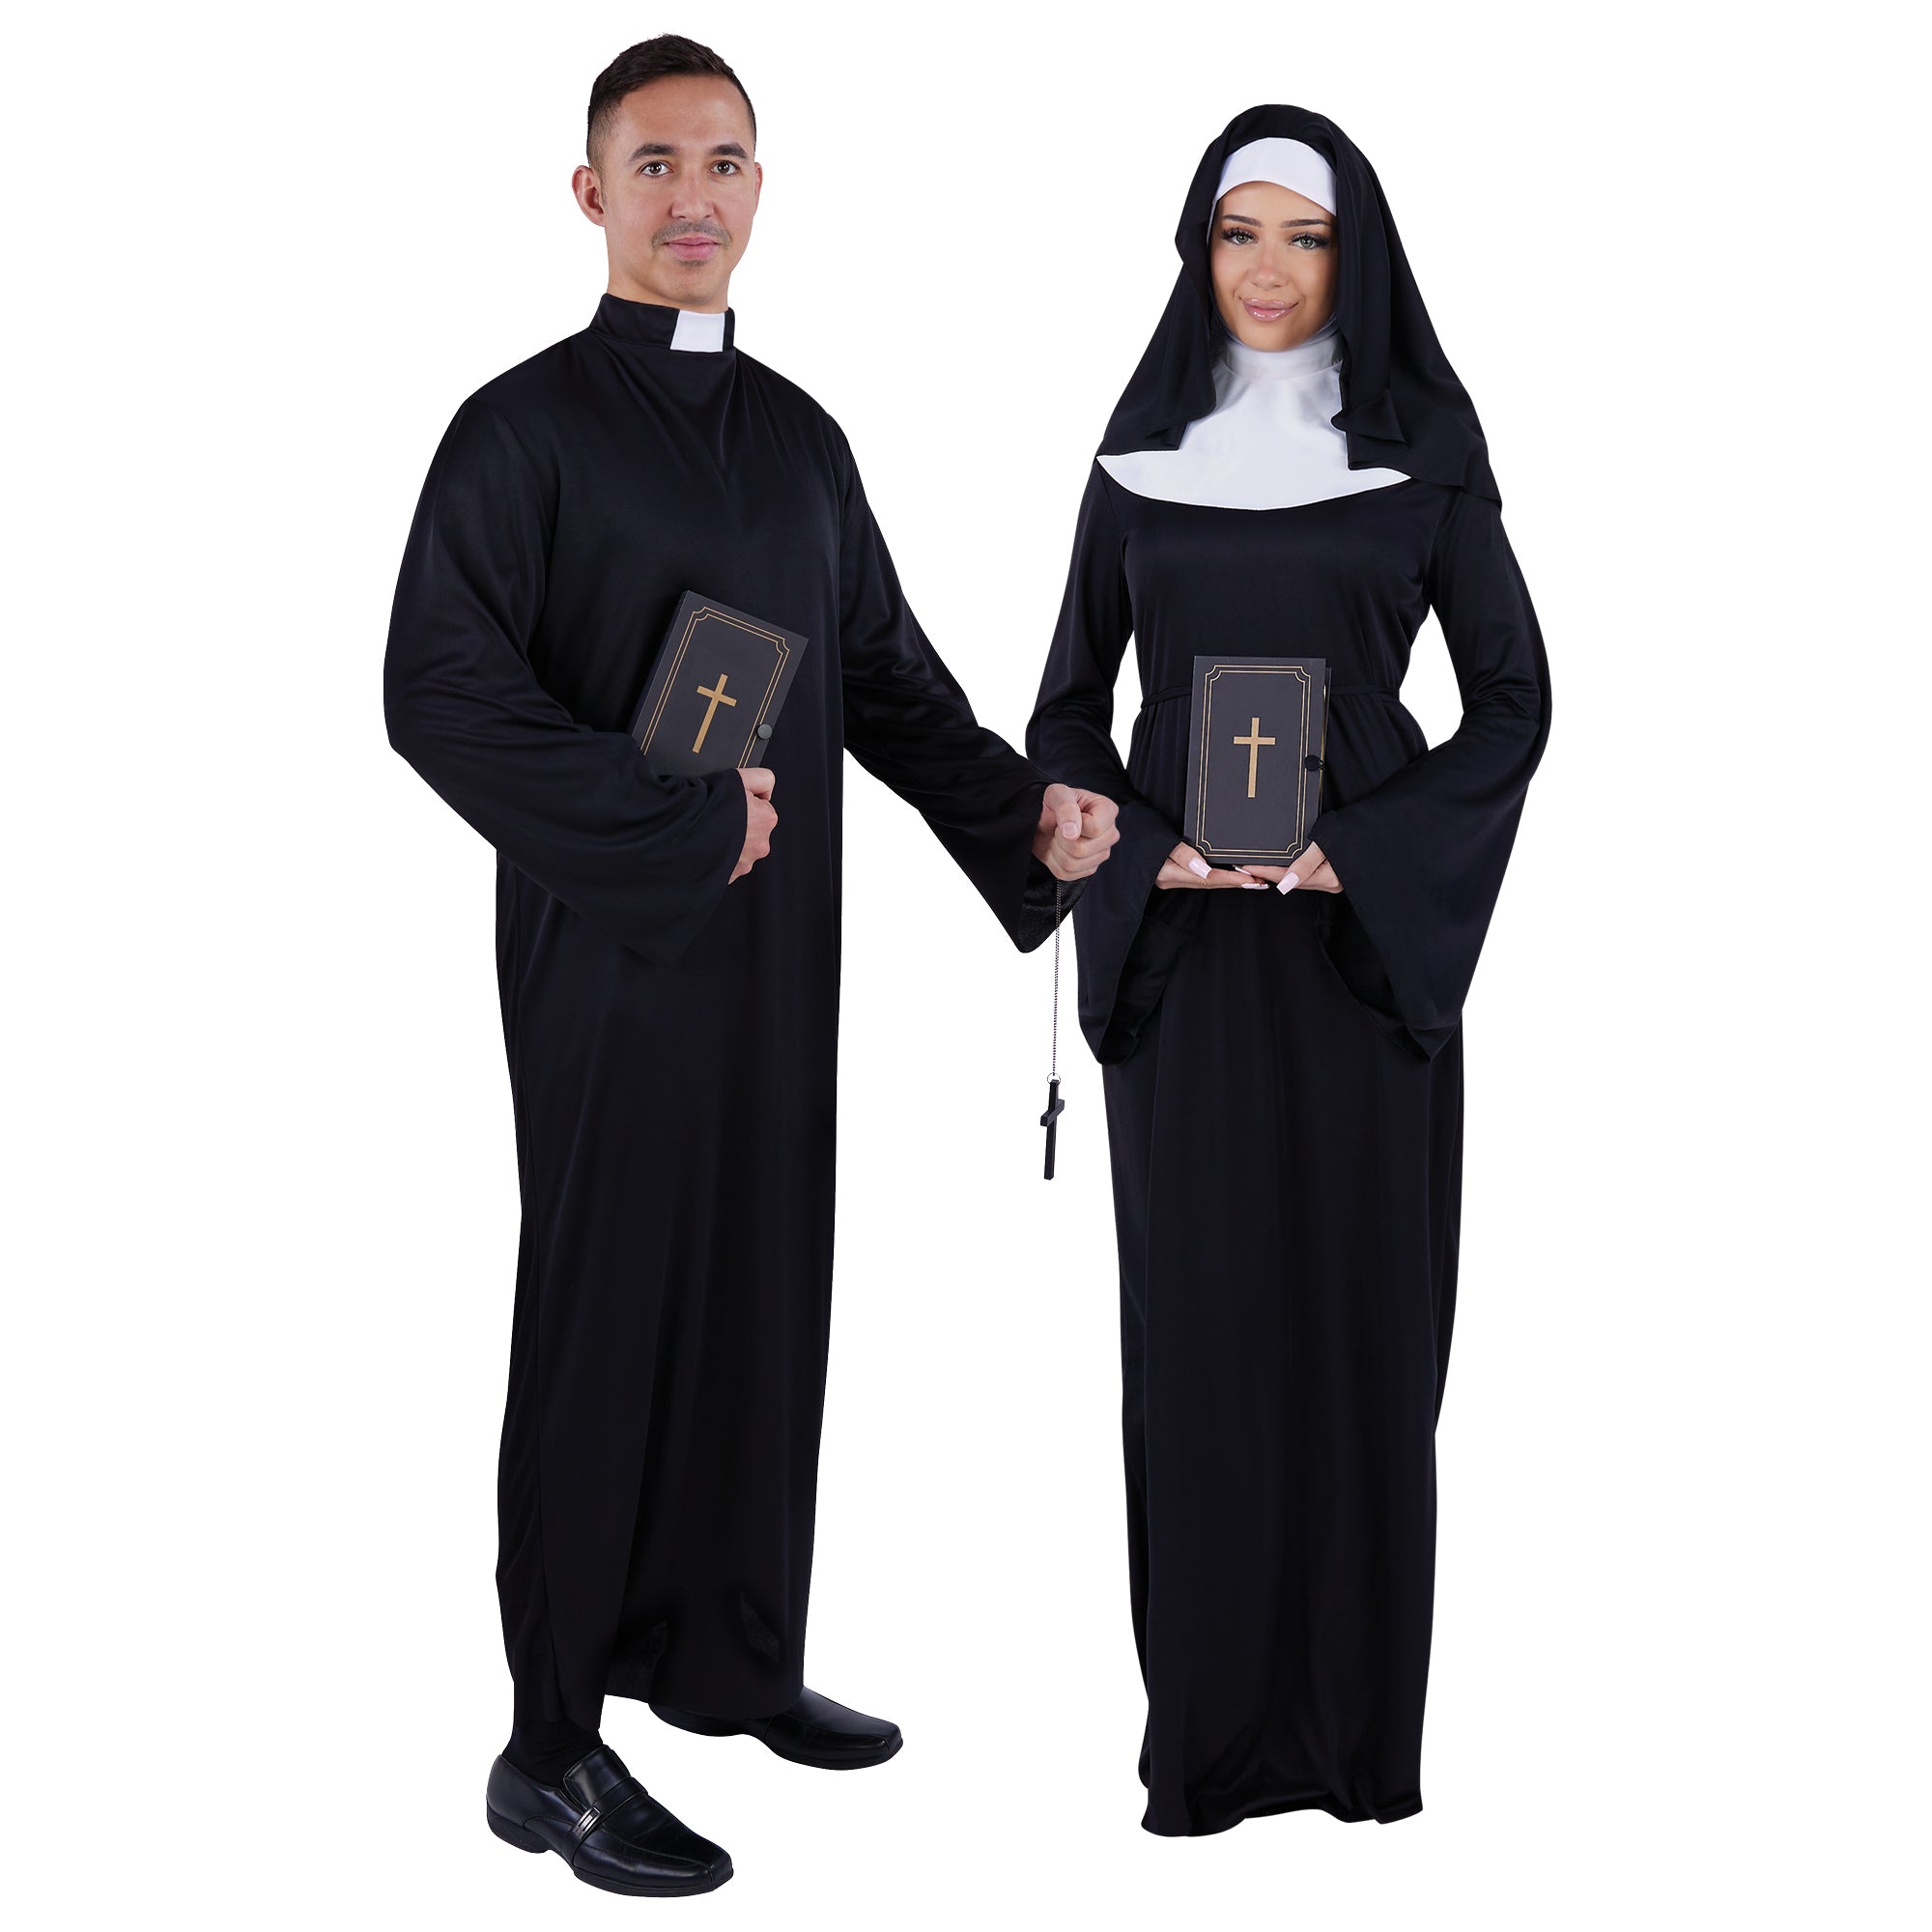 Nun And Priest Couple Costumes Party Expert